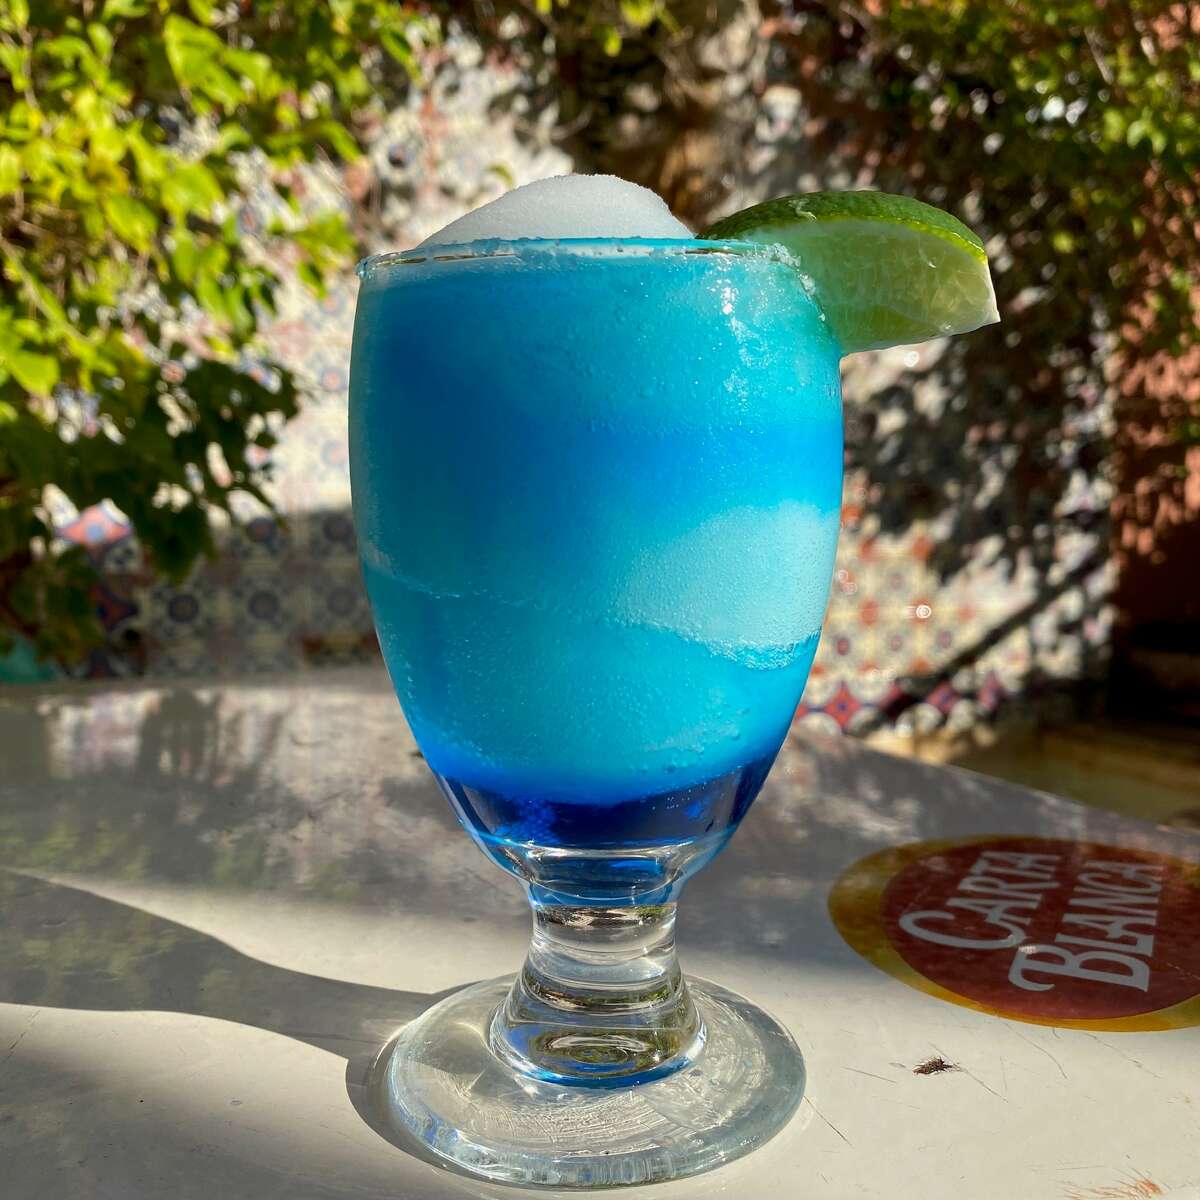 El Patio, the iconic Houston Tex-Mex, will offer its famous blue margaritas for $9 all day on Feb. 22.